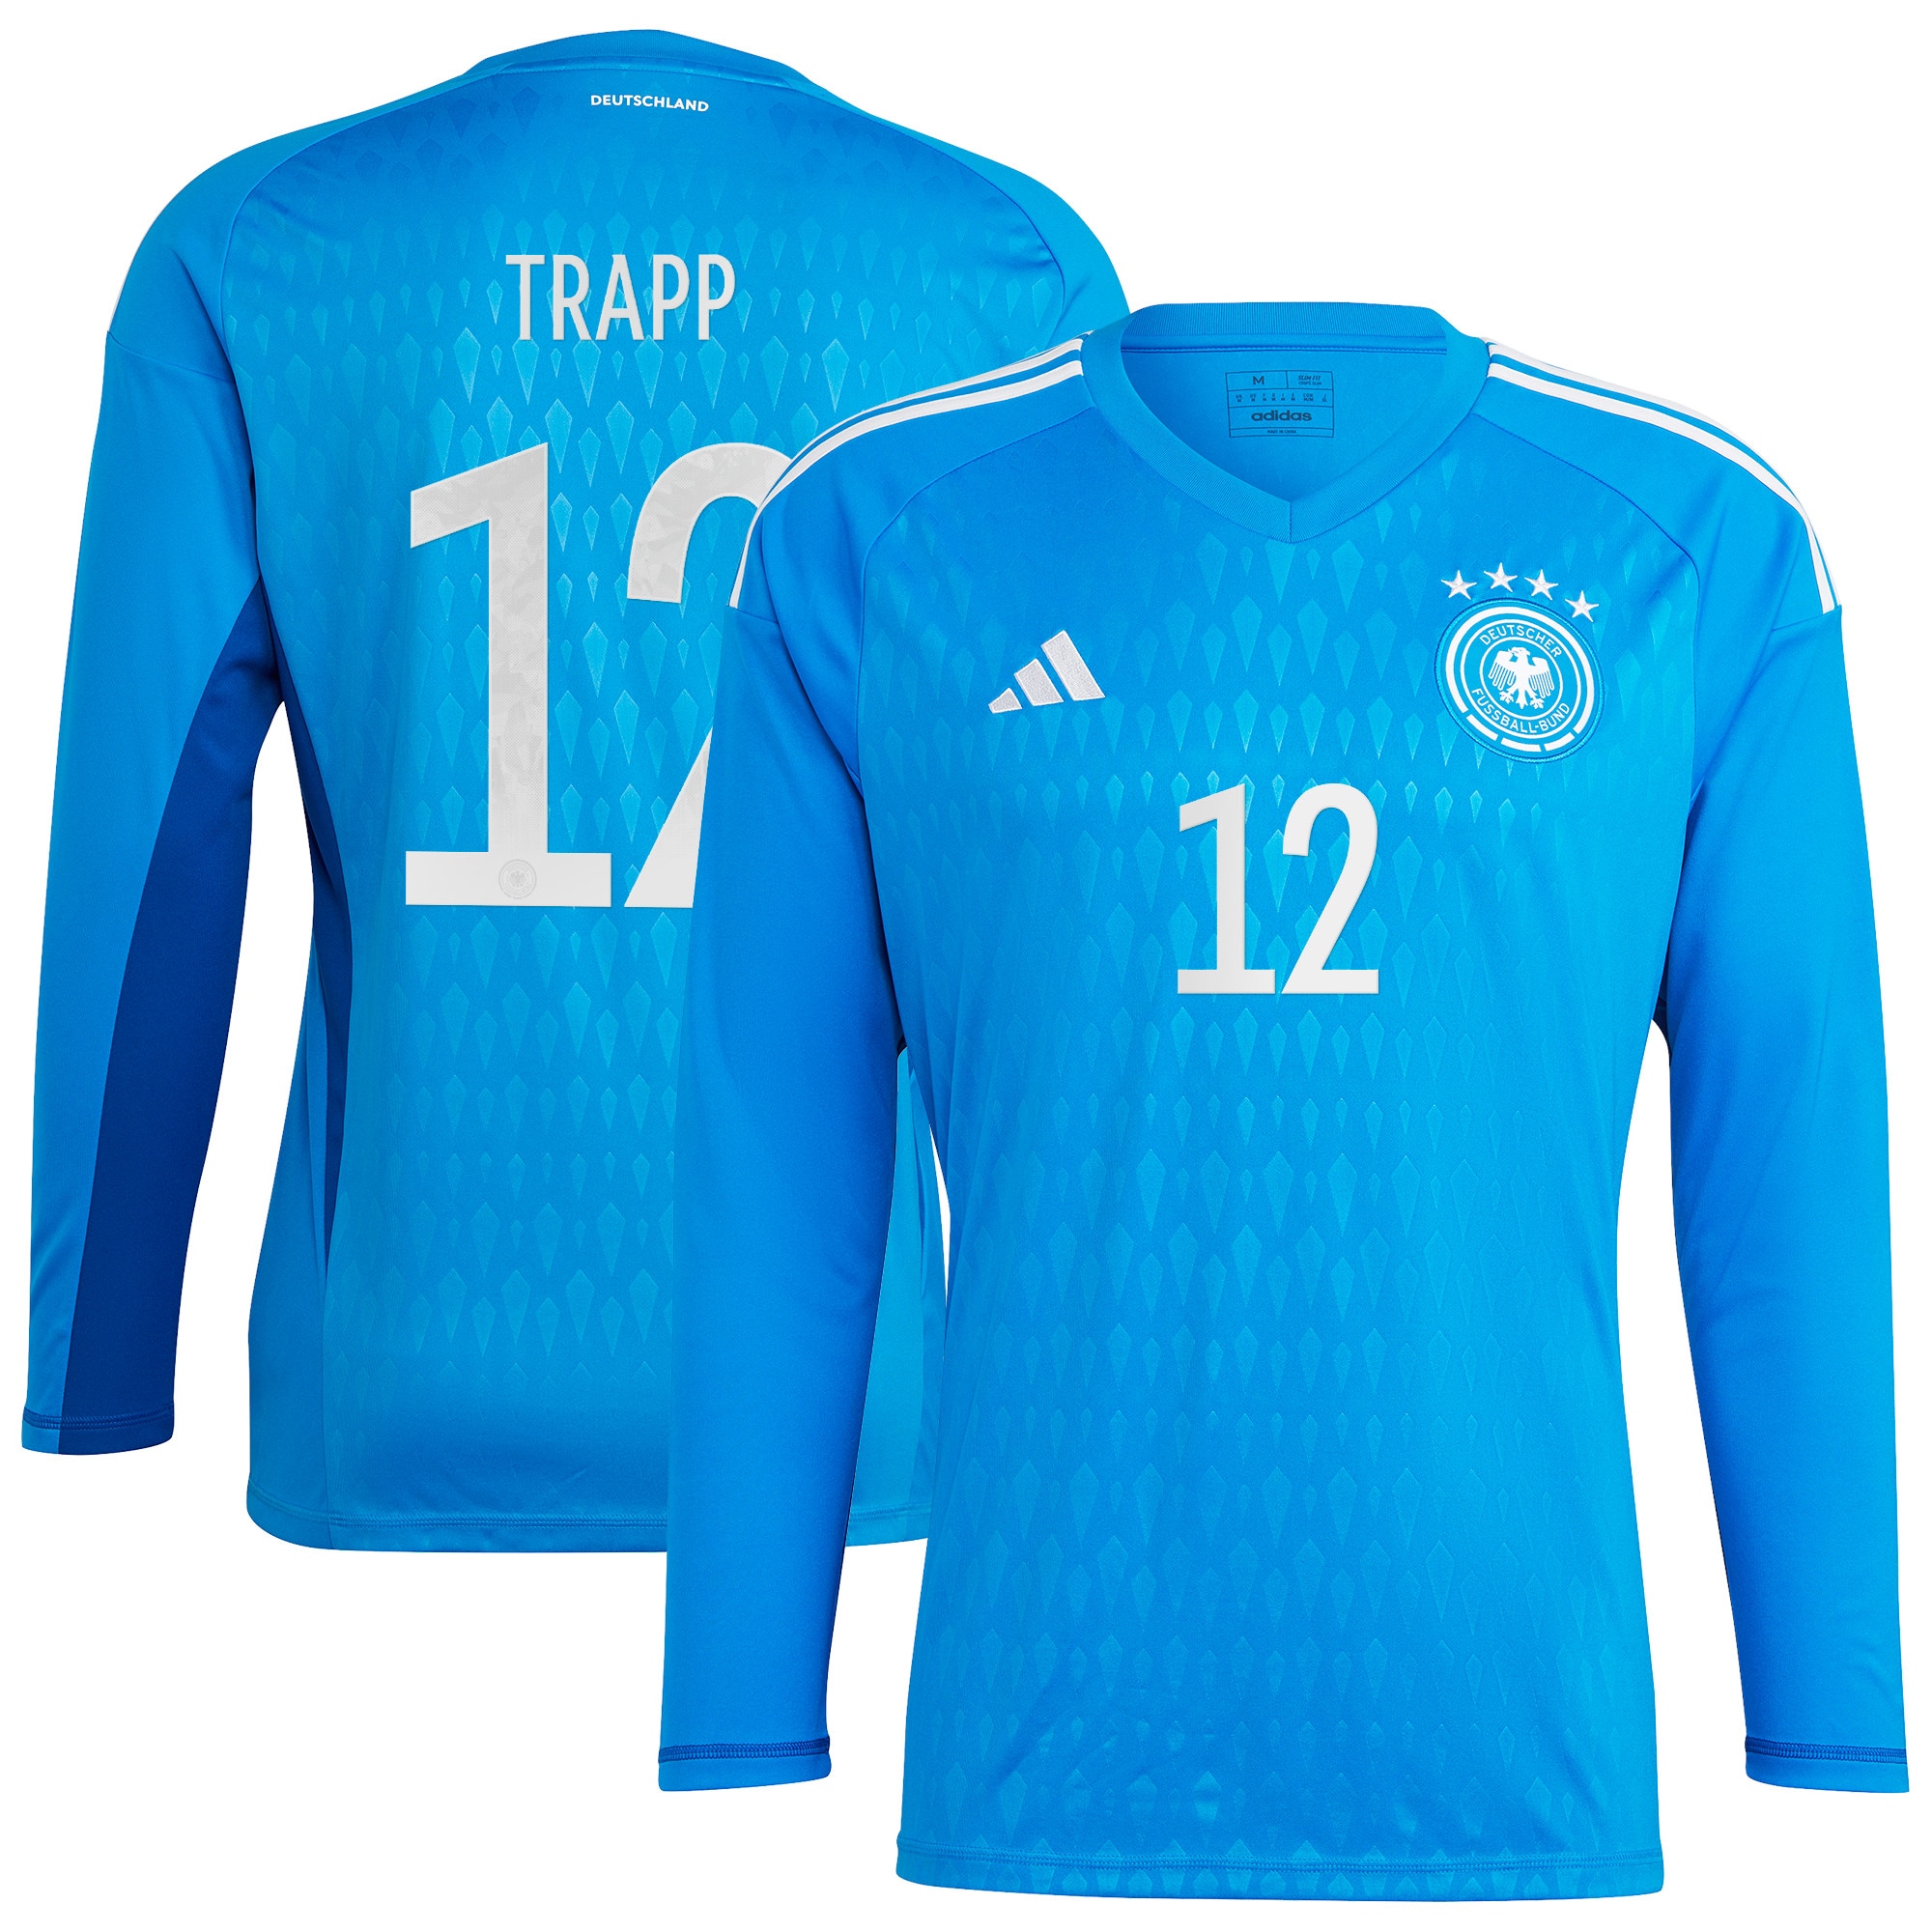 DFB Goalkeeper Shirt Long Sleeve with Trapp 12 printing